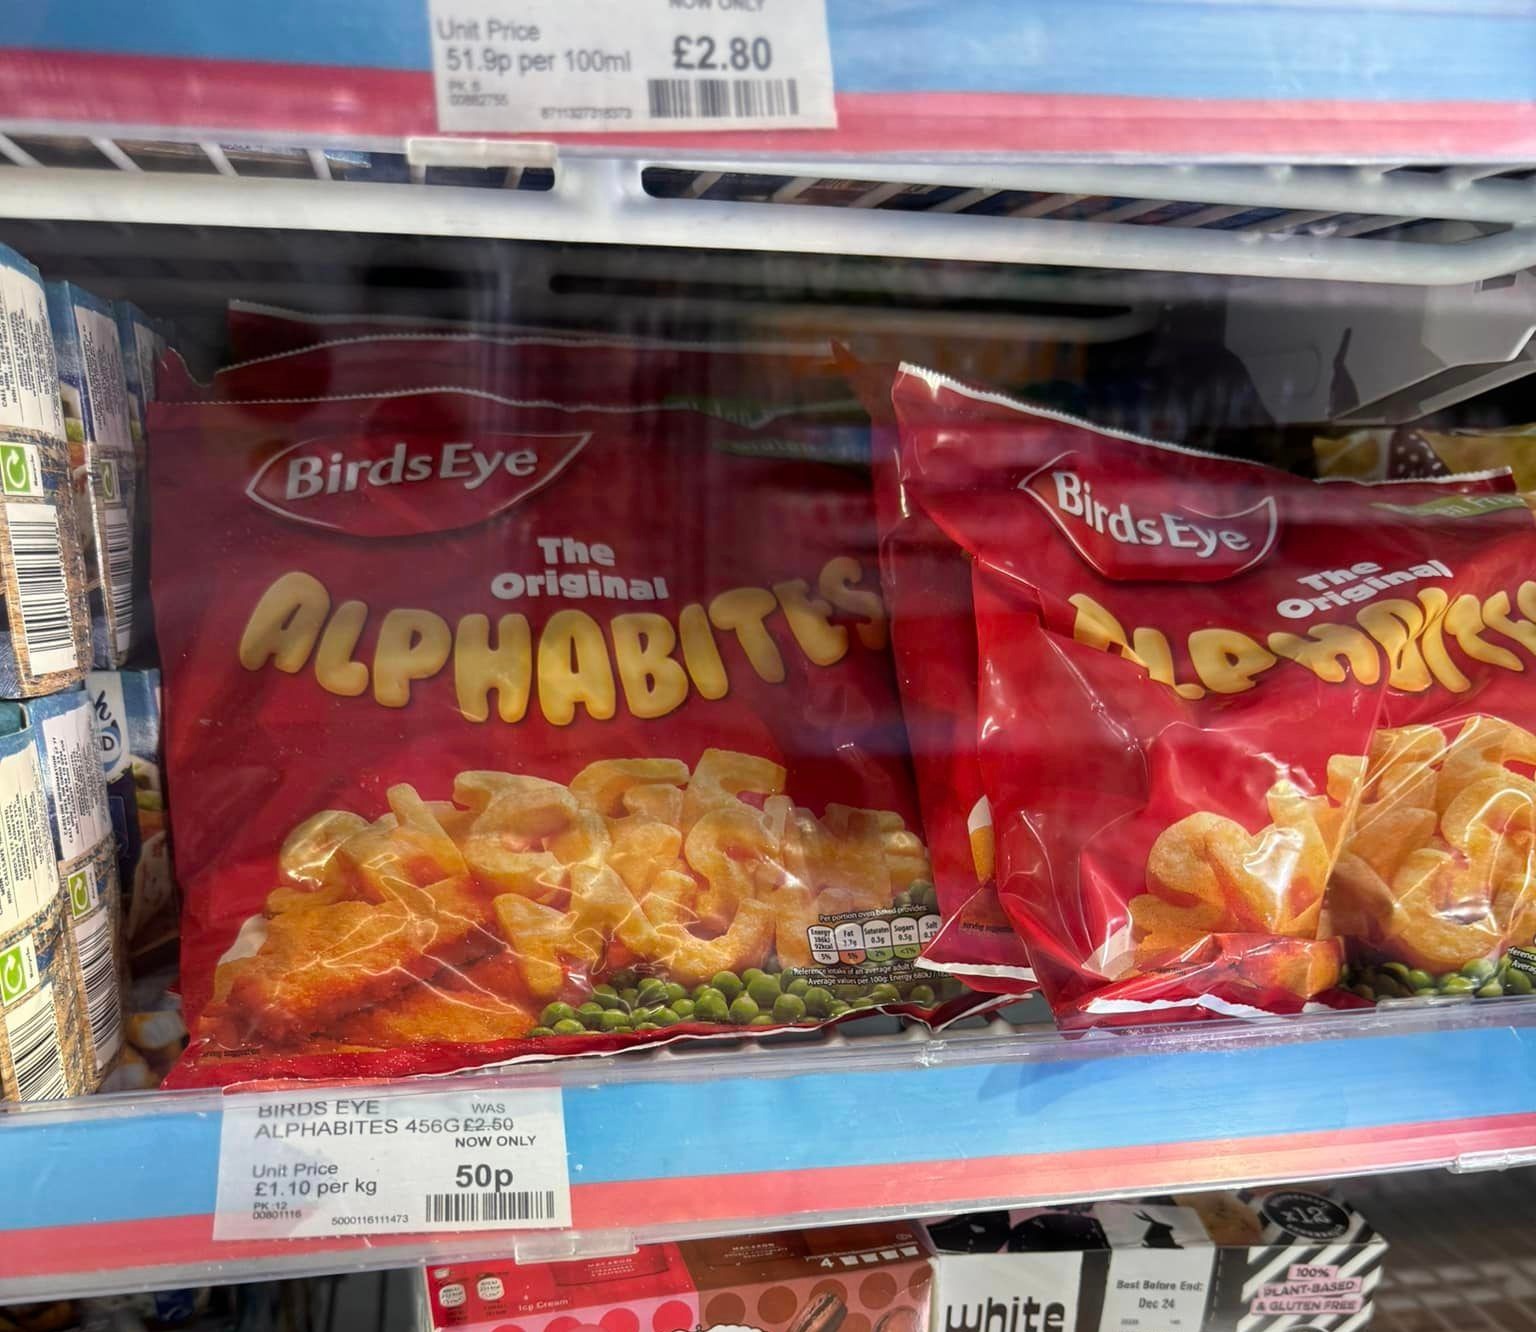 An even bigger bargain sees Birds Eye Alphabites as low as 50p in freezers